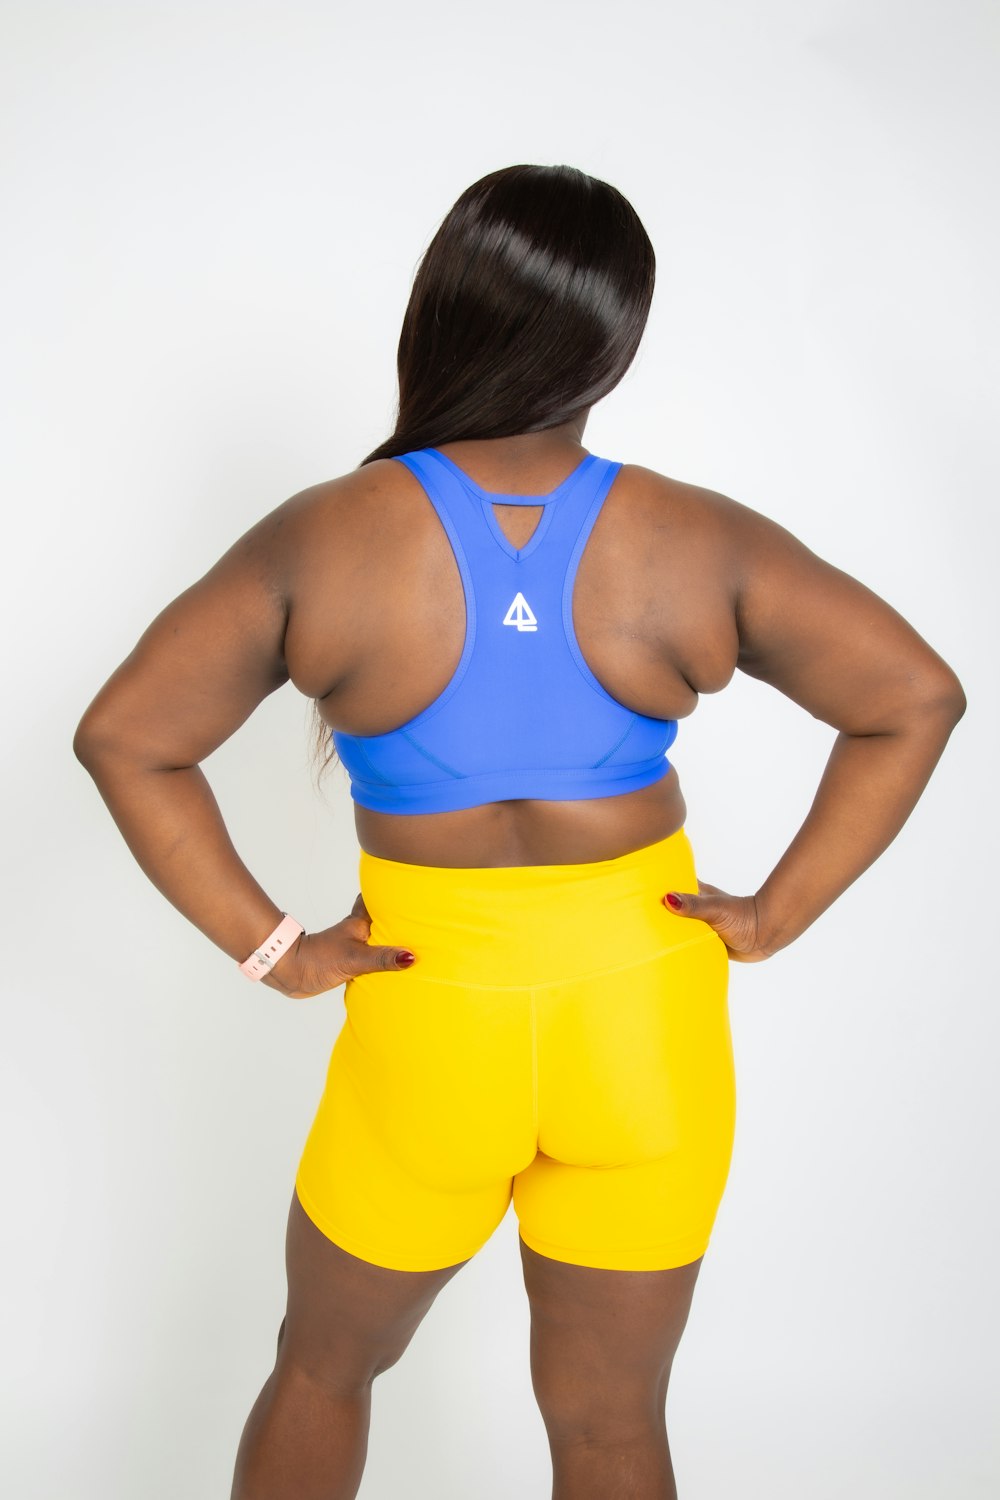 a woman in a blue top and yellow shorts